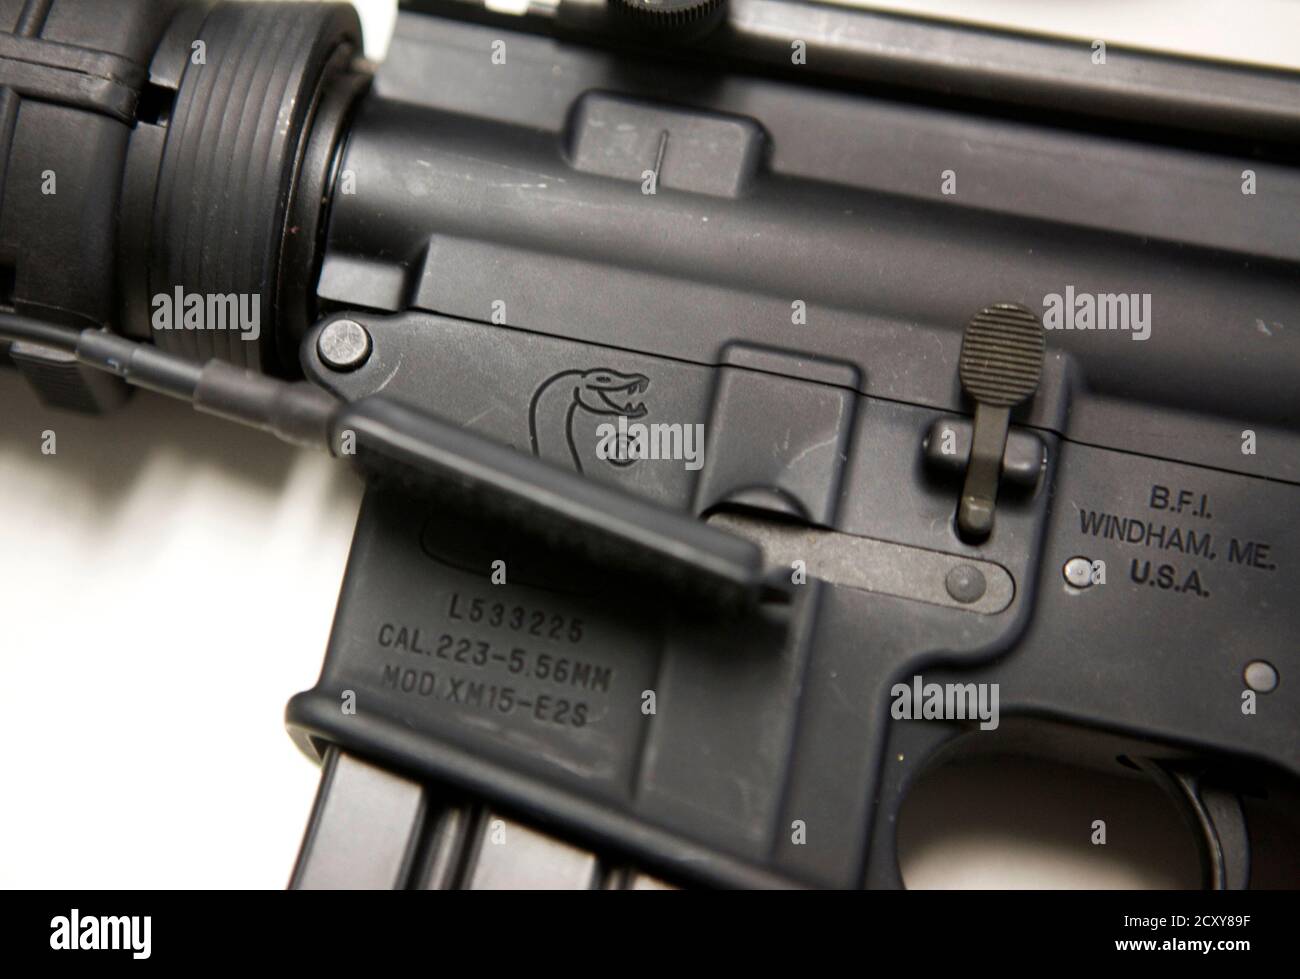 Bushmaster Rifle High Resolution Stock Photography and Images - Alamy